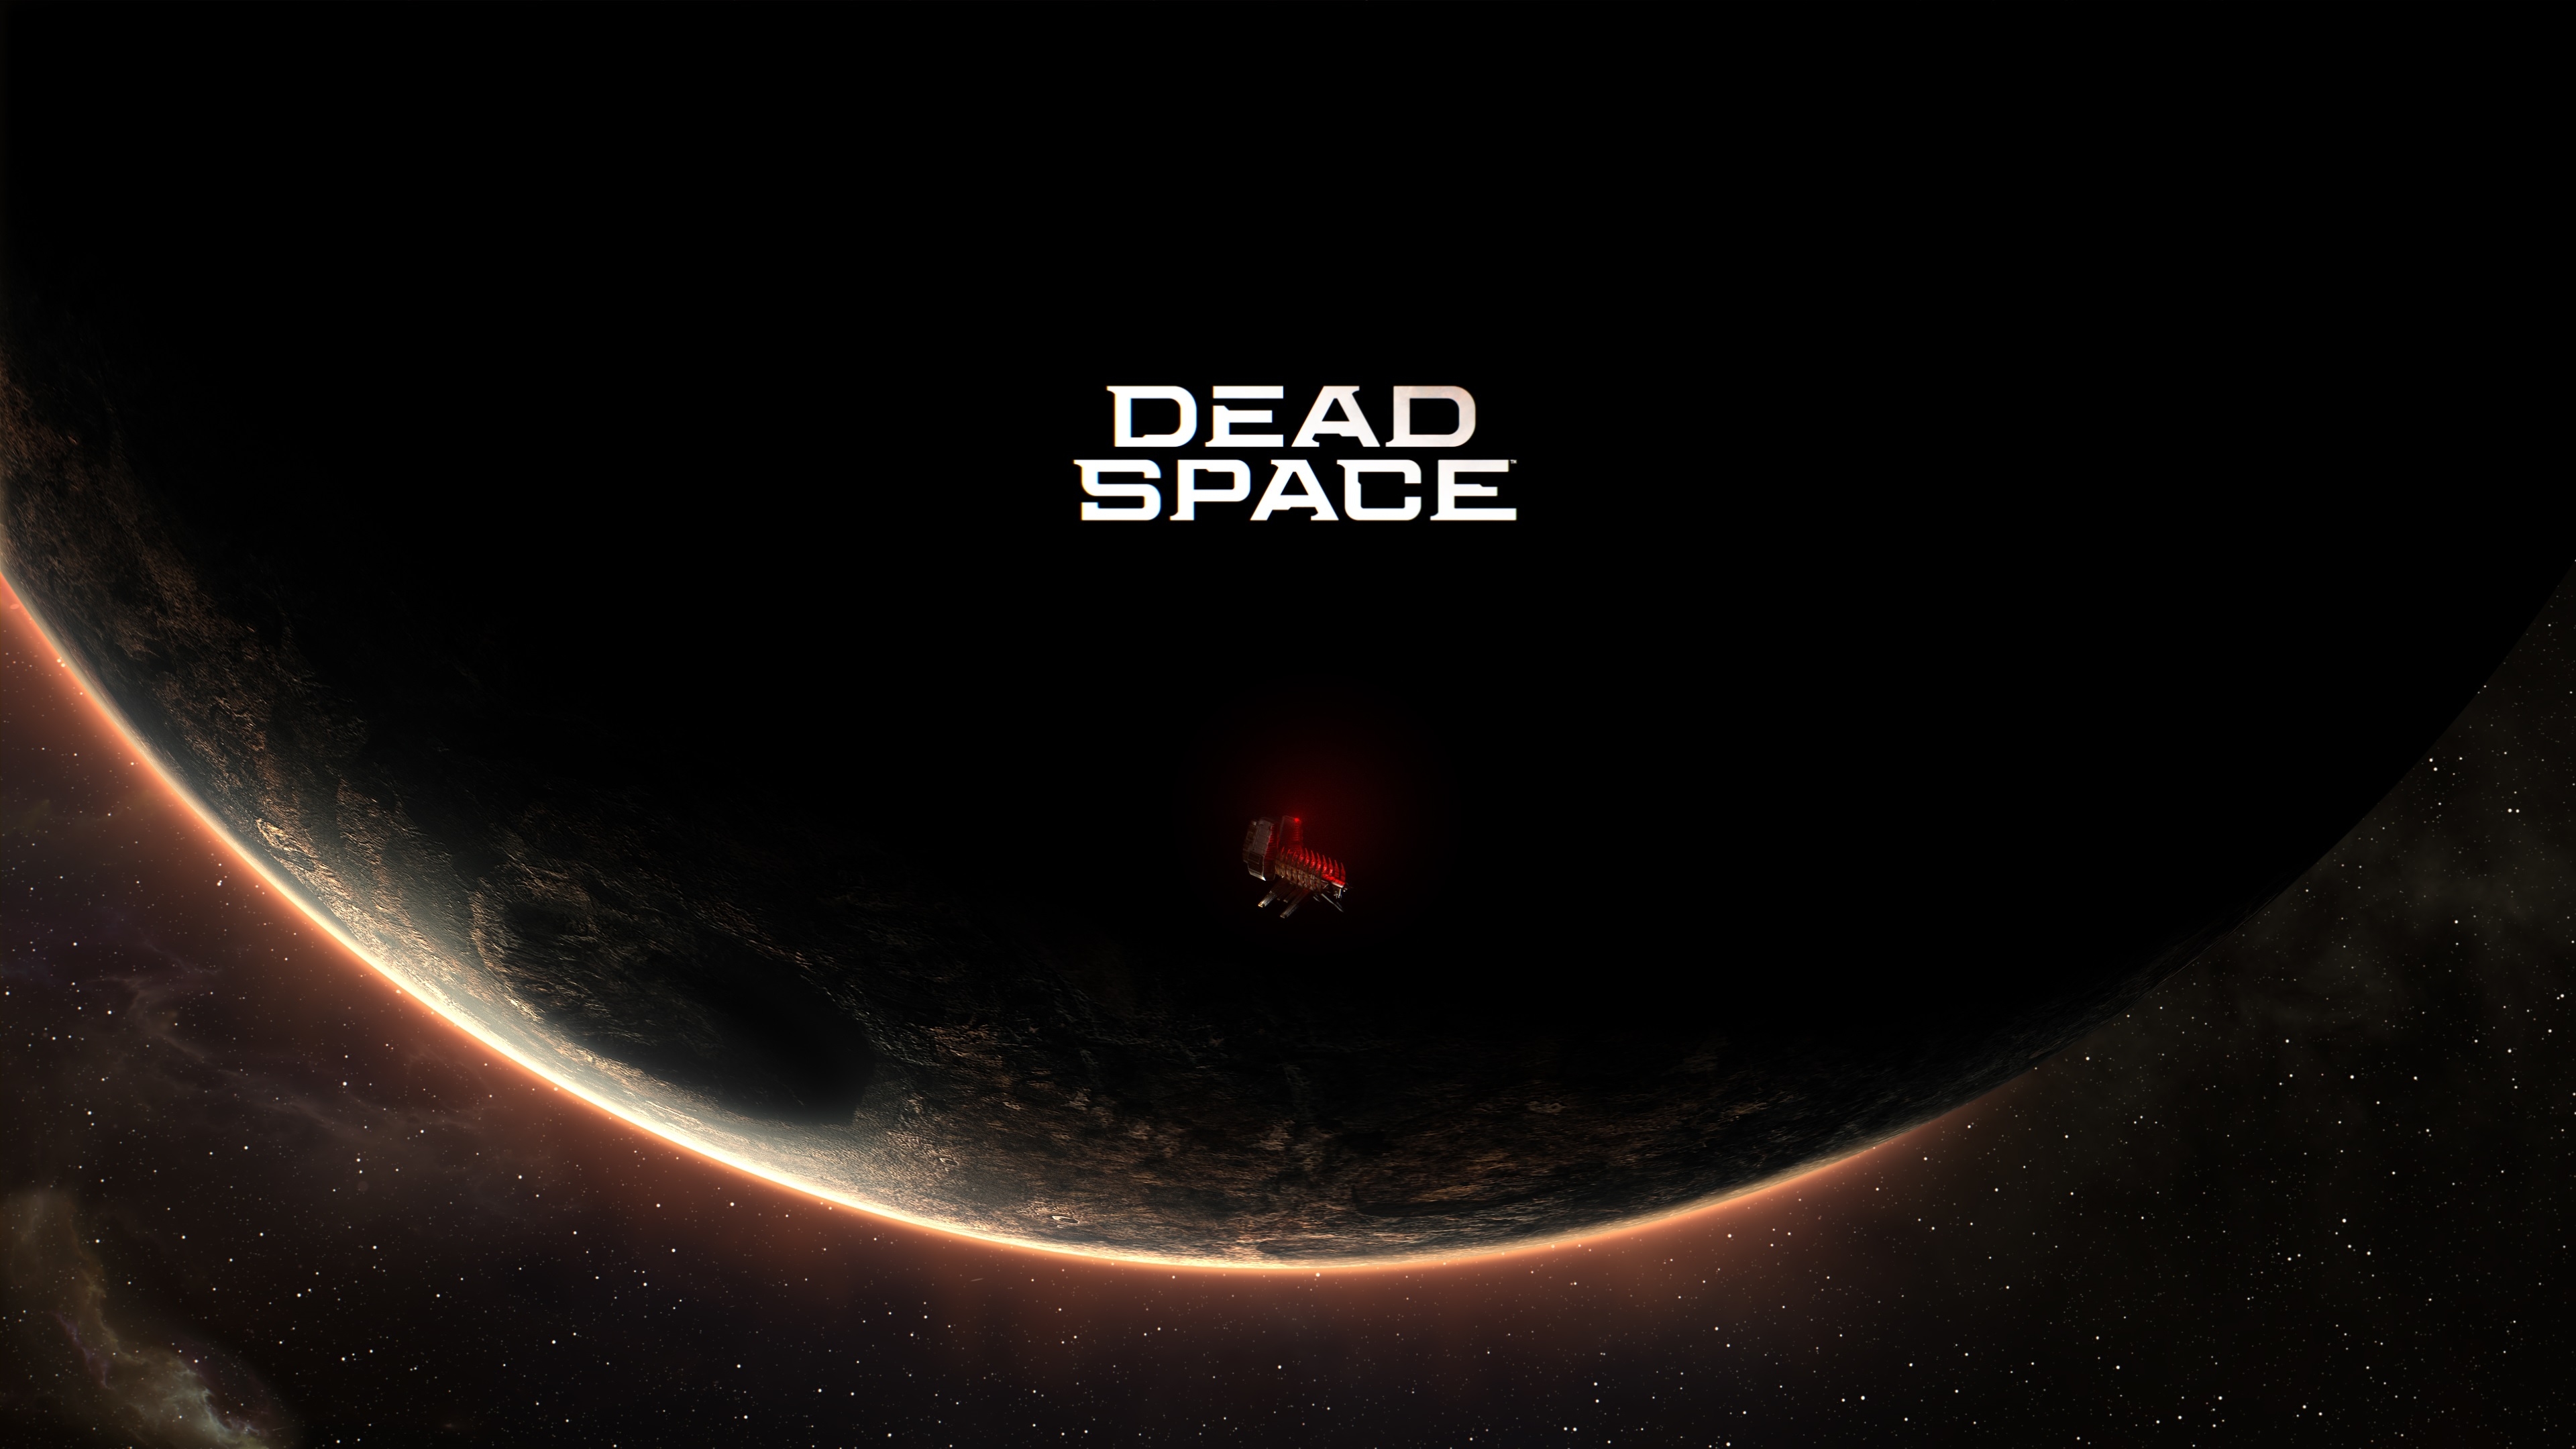 HD wallpaper, 2023 Games, Xbox Series X And Series S, Playstation 5, Dead Space, Pc Games